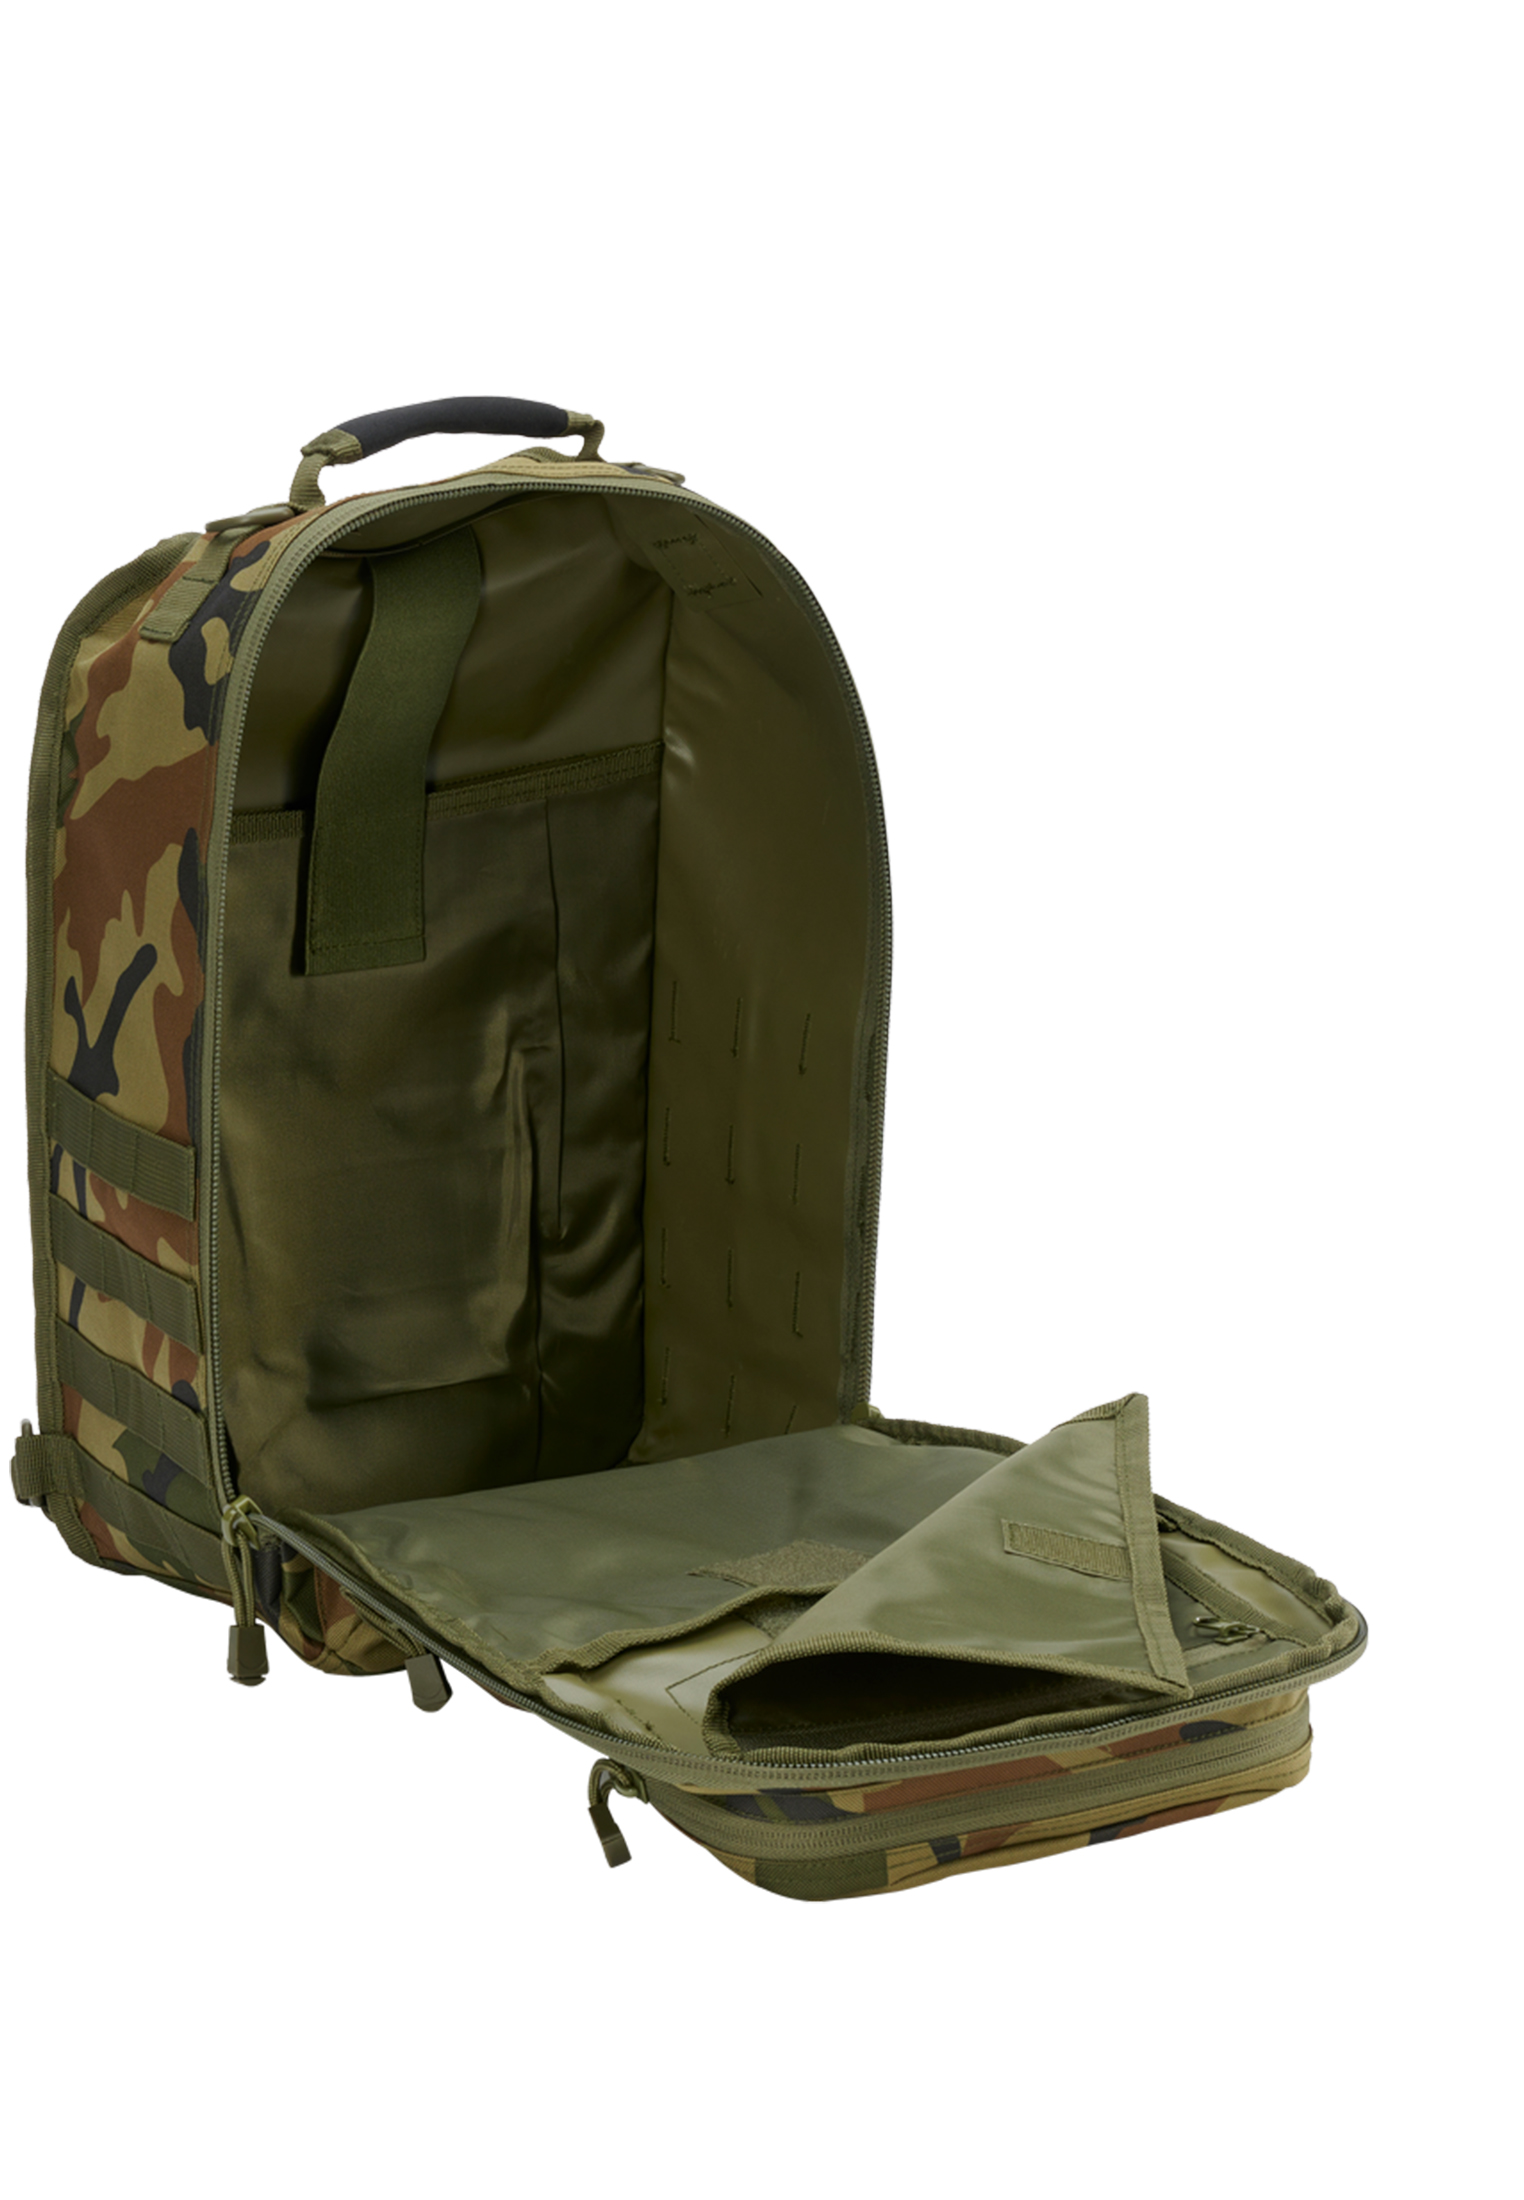 Accessoires Iso Mattress Molle in Farbe woodland